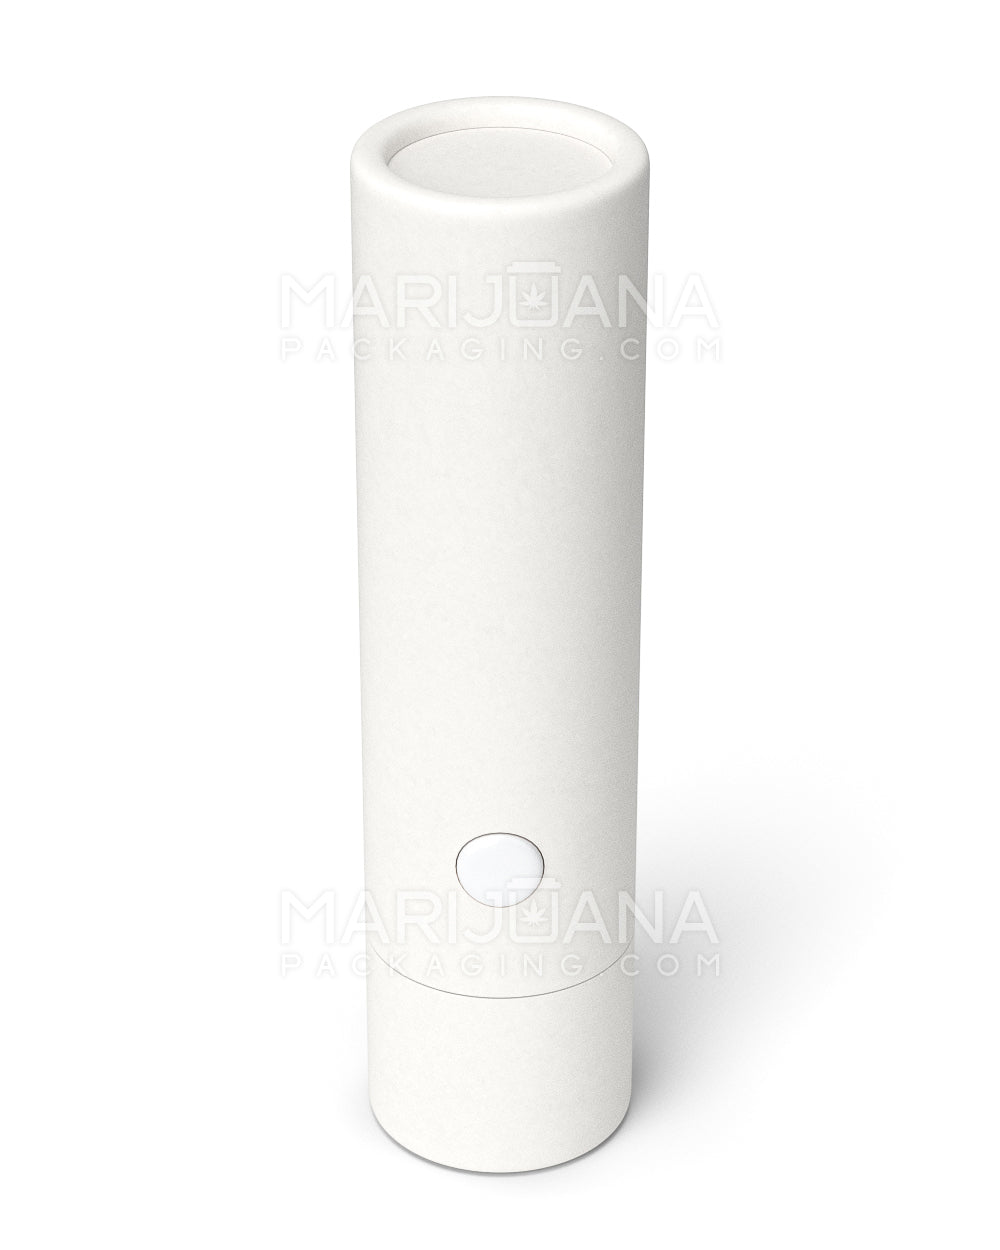 Child Resistant & Sustainable | 100% Recyclable Cardboard Vape Cartridge Tube w/ Press Button | 95mm - White - 100 Count - 7